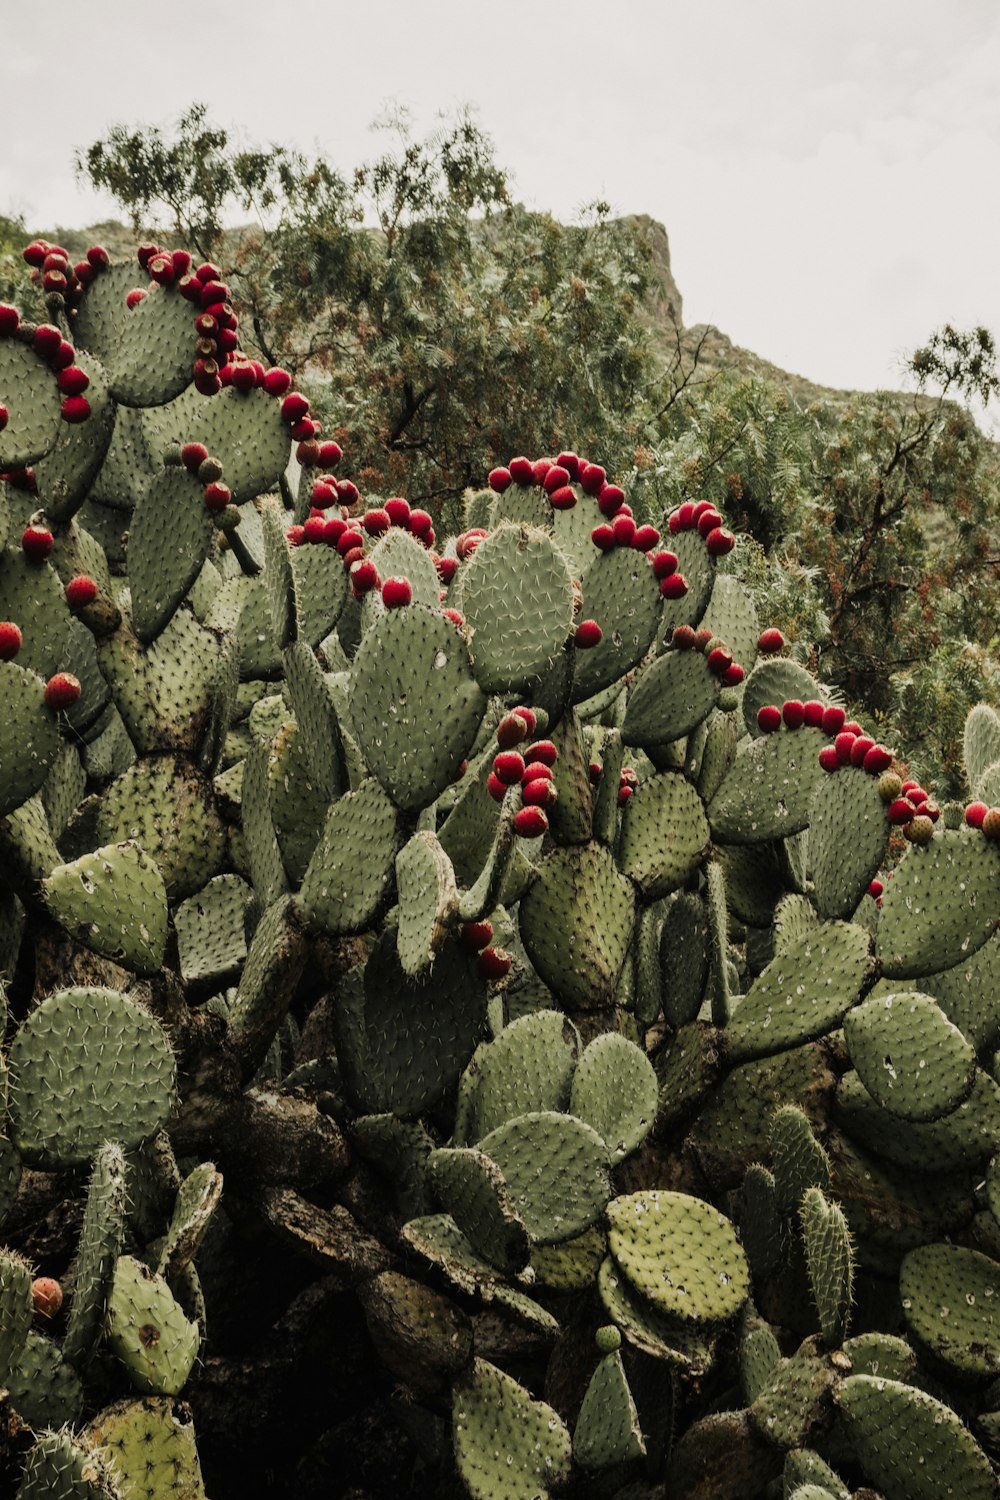 a large cactus with red berries on it